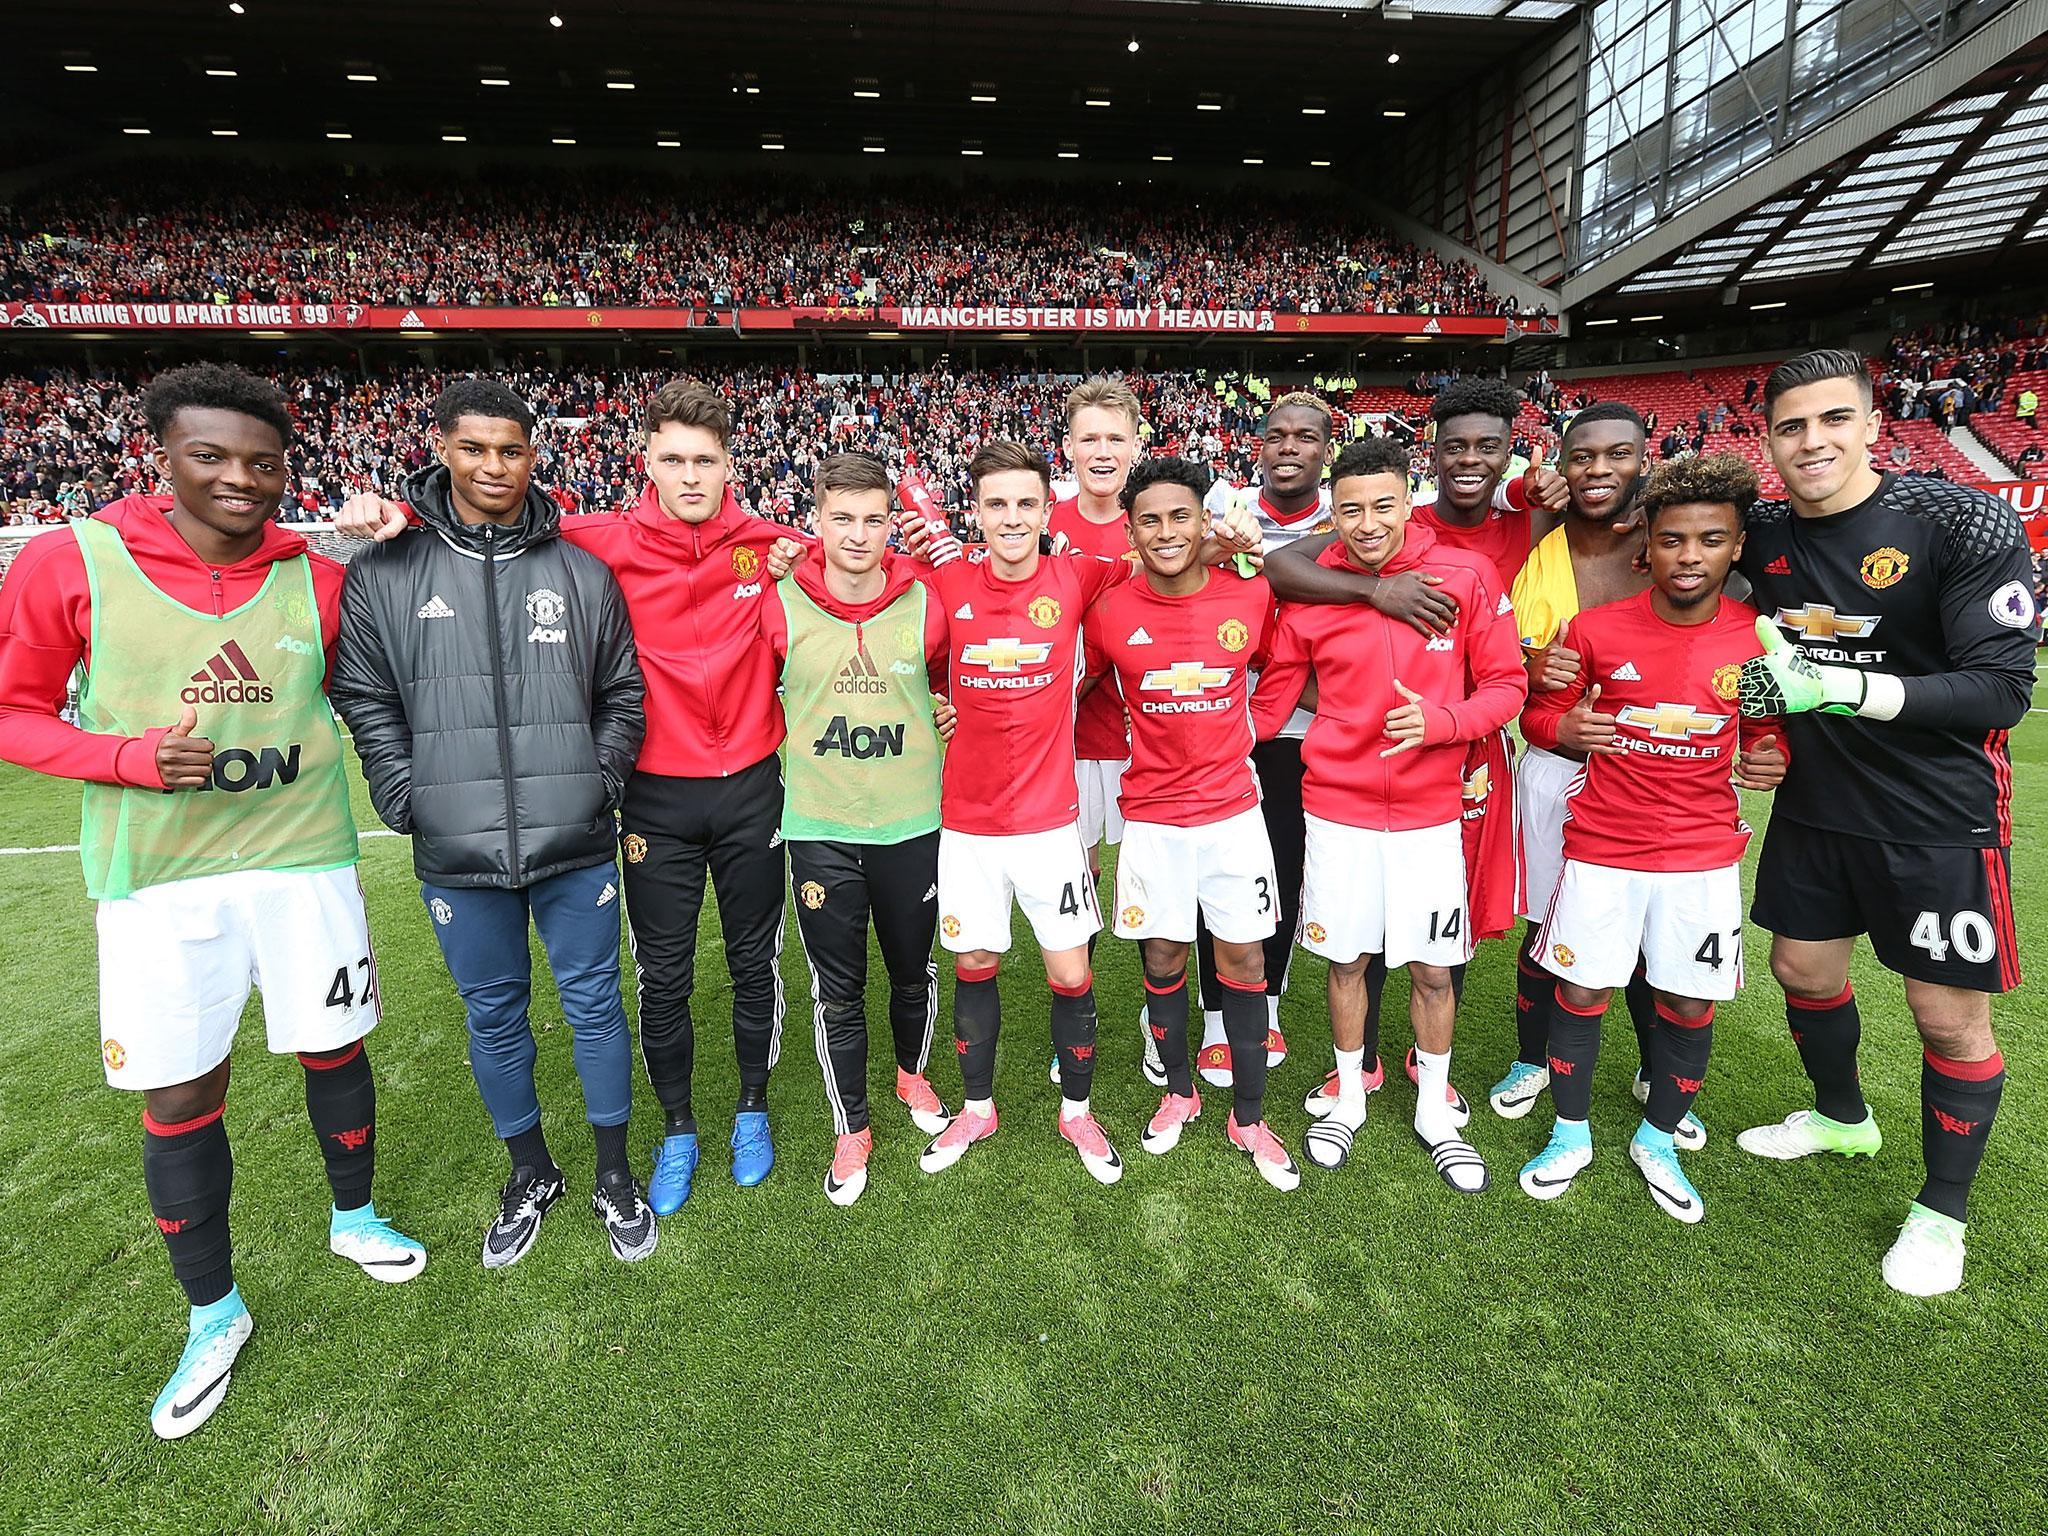 Manchester United's line-up against Crystal Palace was their youngest-ever in the Premier League